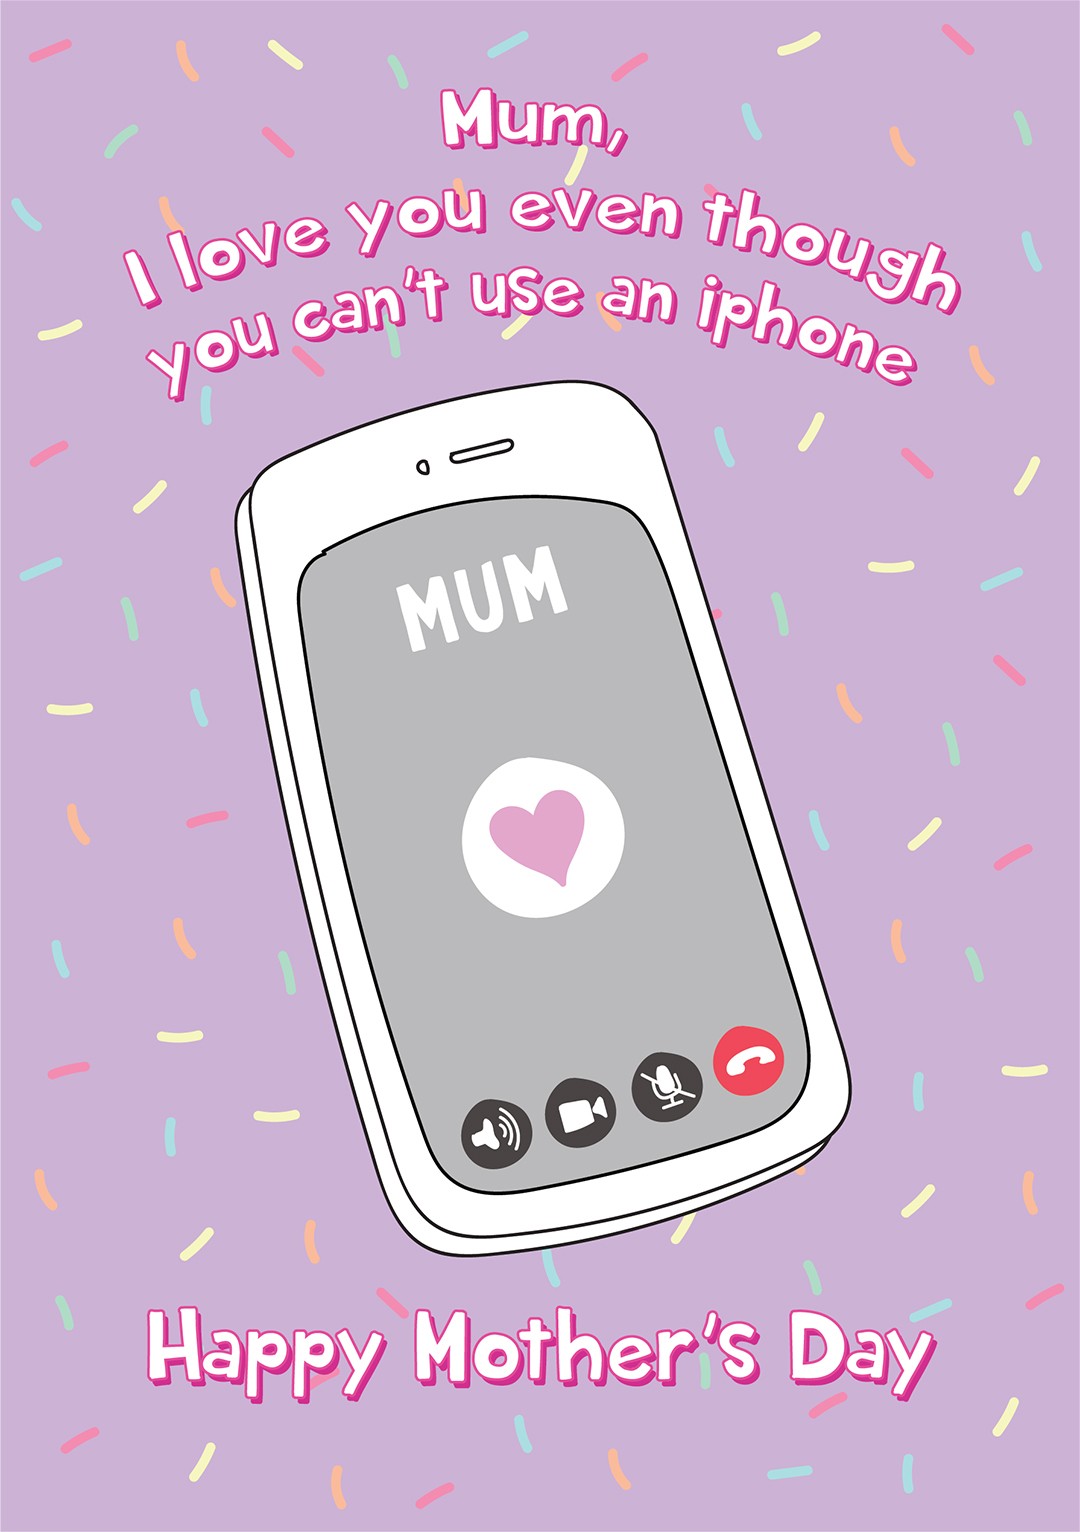 I Love You Even Though You Can't Use An iphone - Mother's Day Card